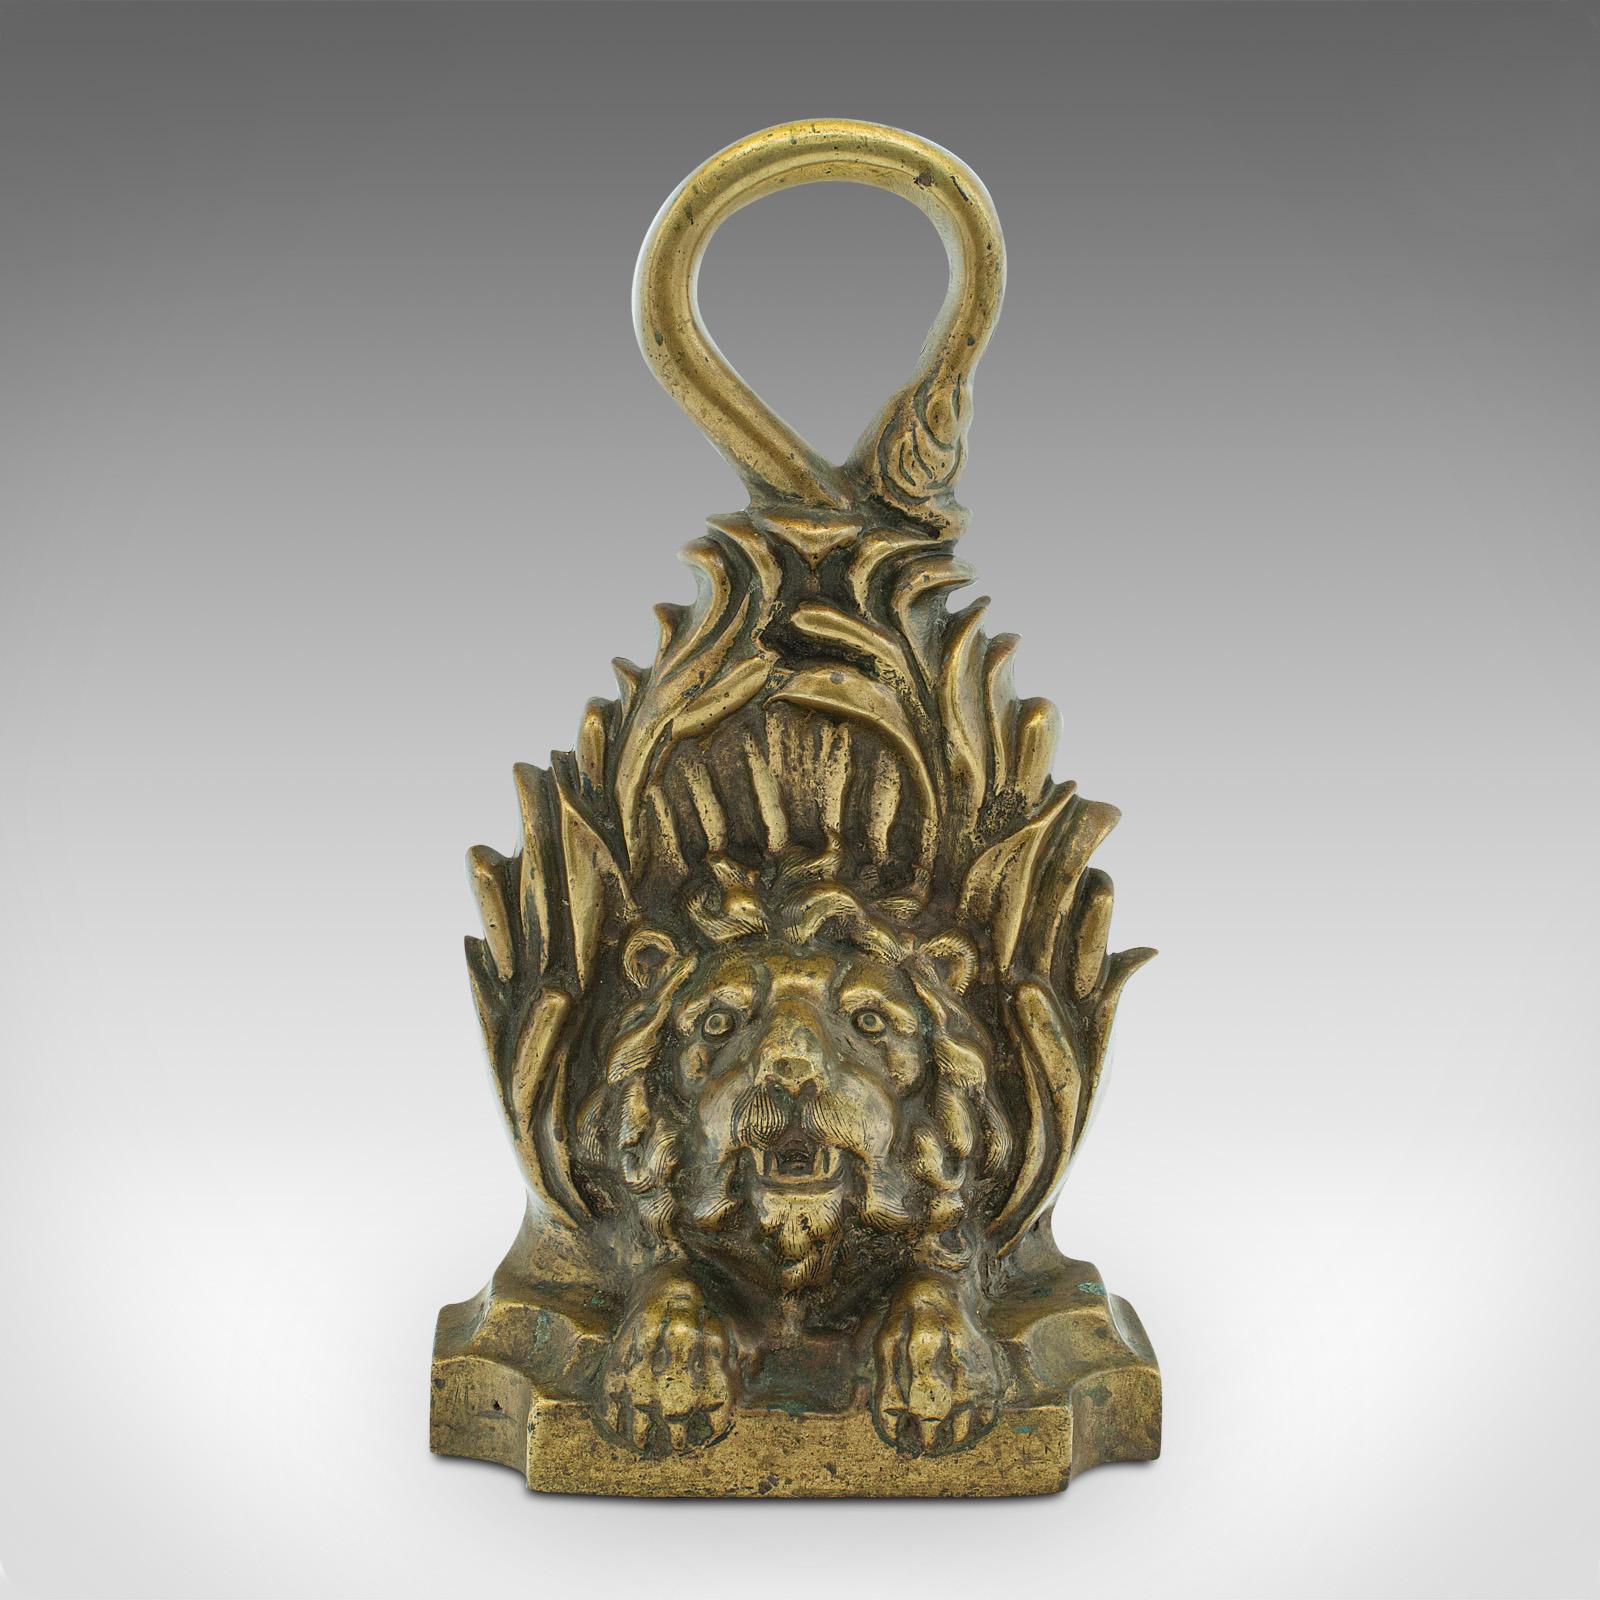 This is a heavy antique lion doorstop. An English, brass and lead decorative door keeper, dating to the early Victorian period, circa 1850.

Delightfully substantial stopper graced with an abundance of character
Displays a desirable aged patina